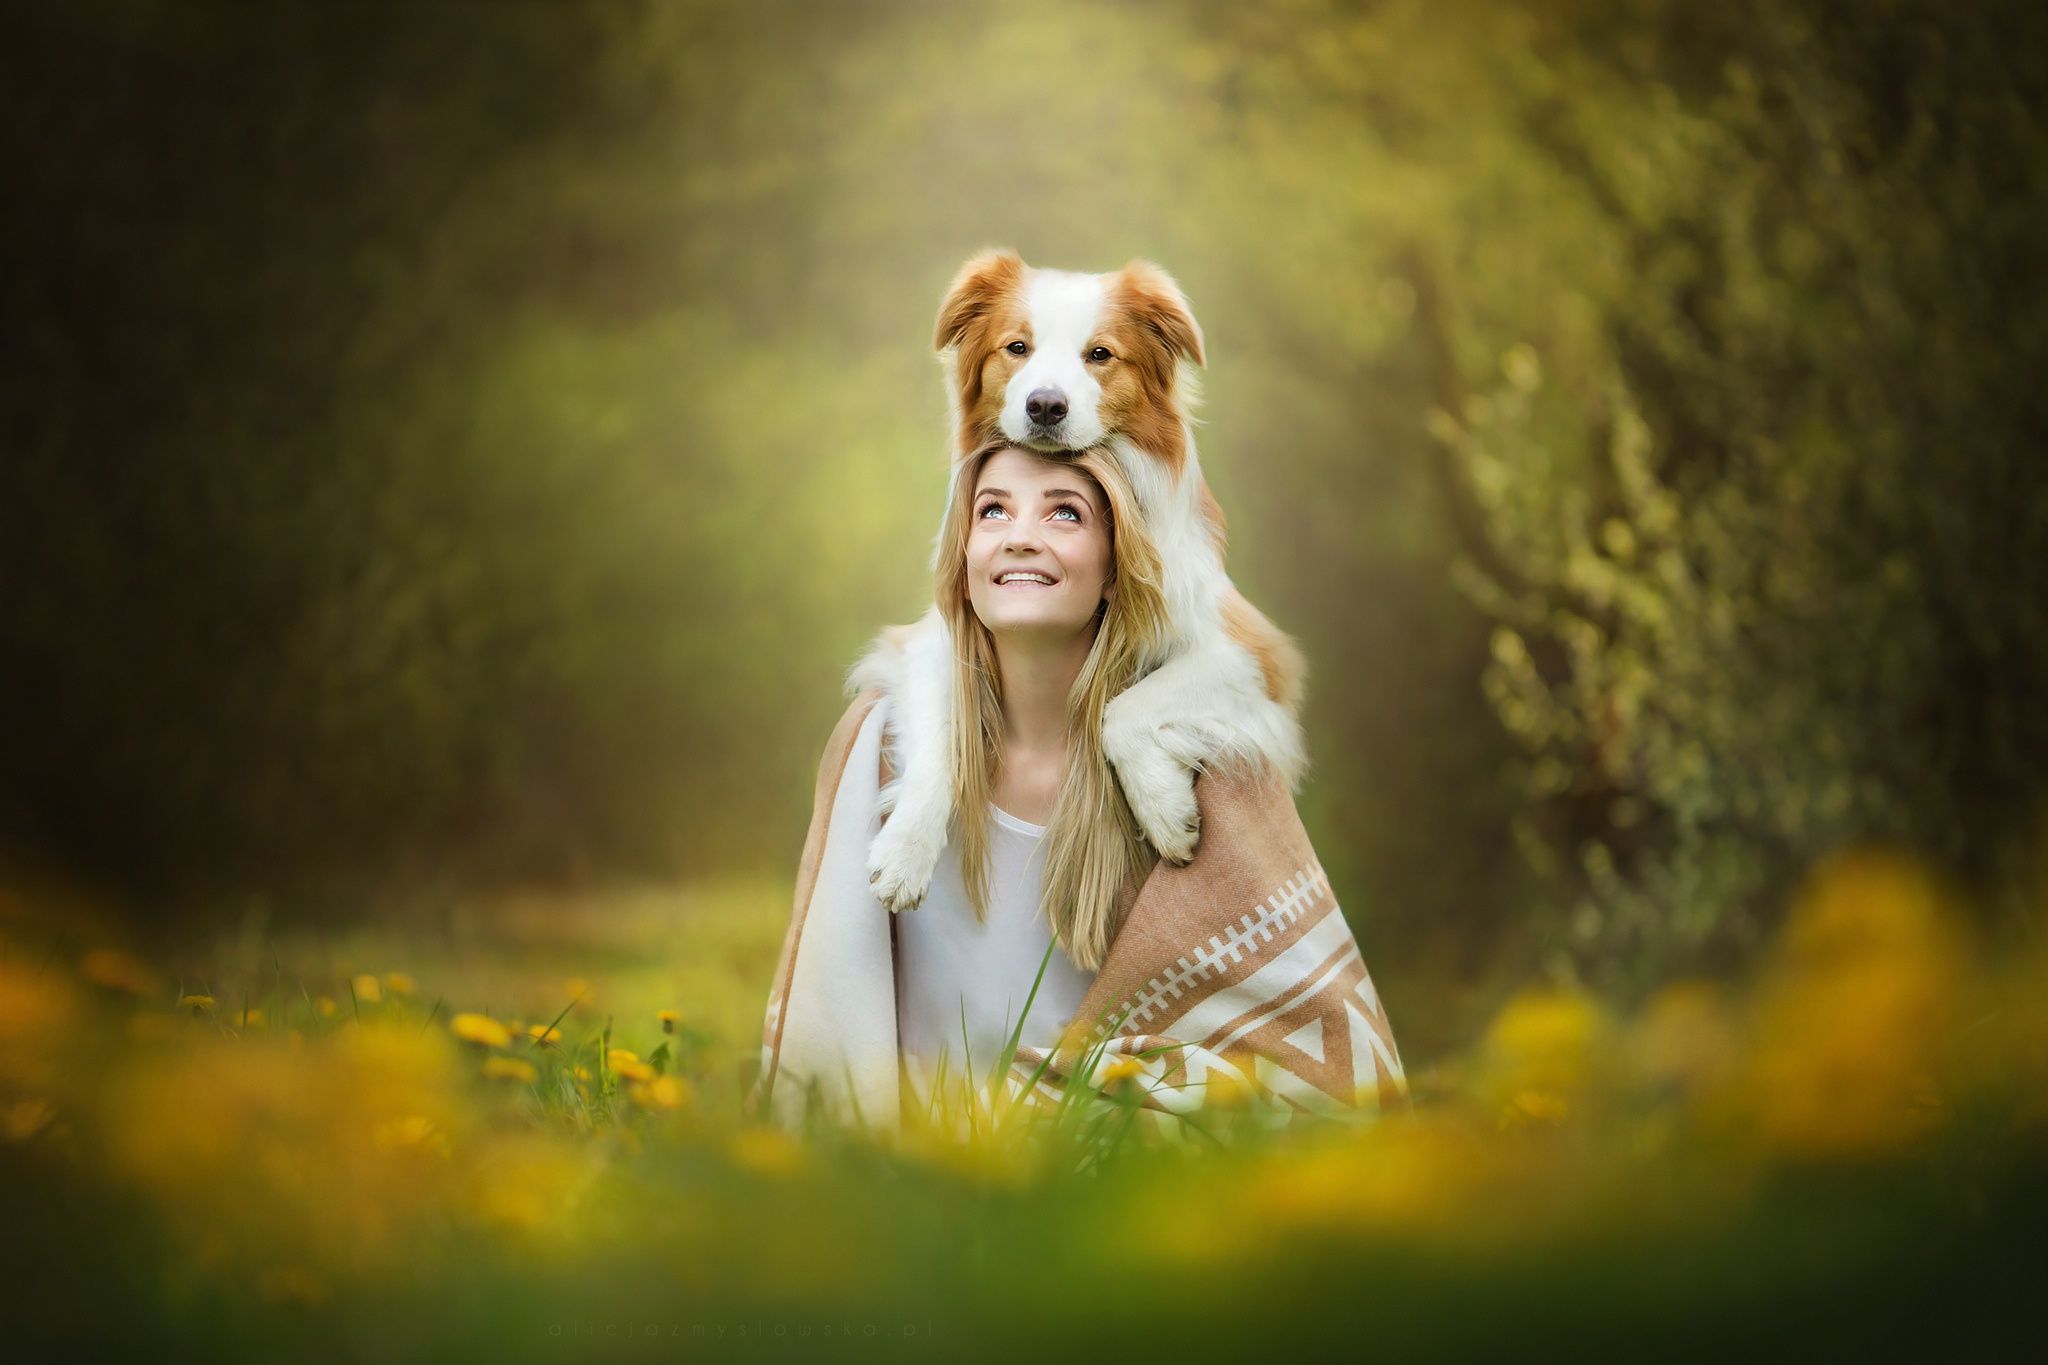 Cute Girl With Dog, HD Animals, 4k Wallpaper, Image, Background, Photo and Picture